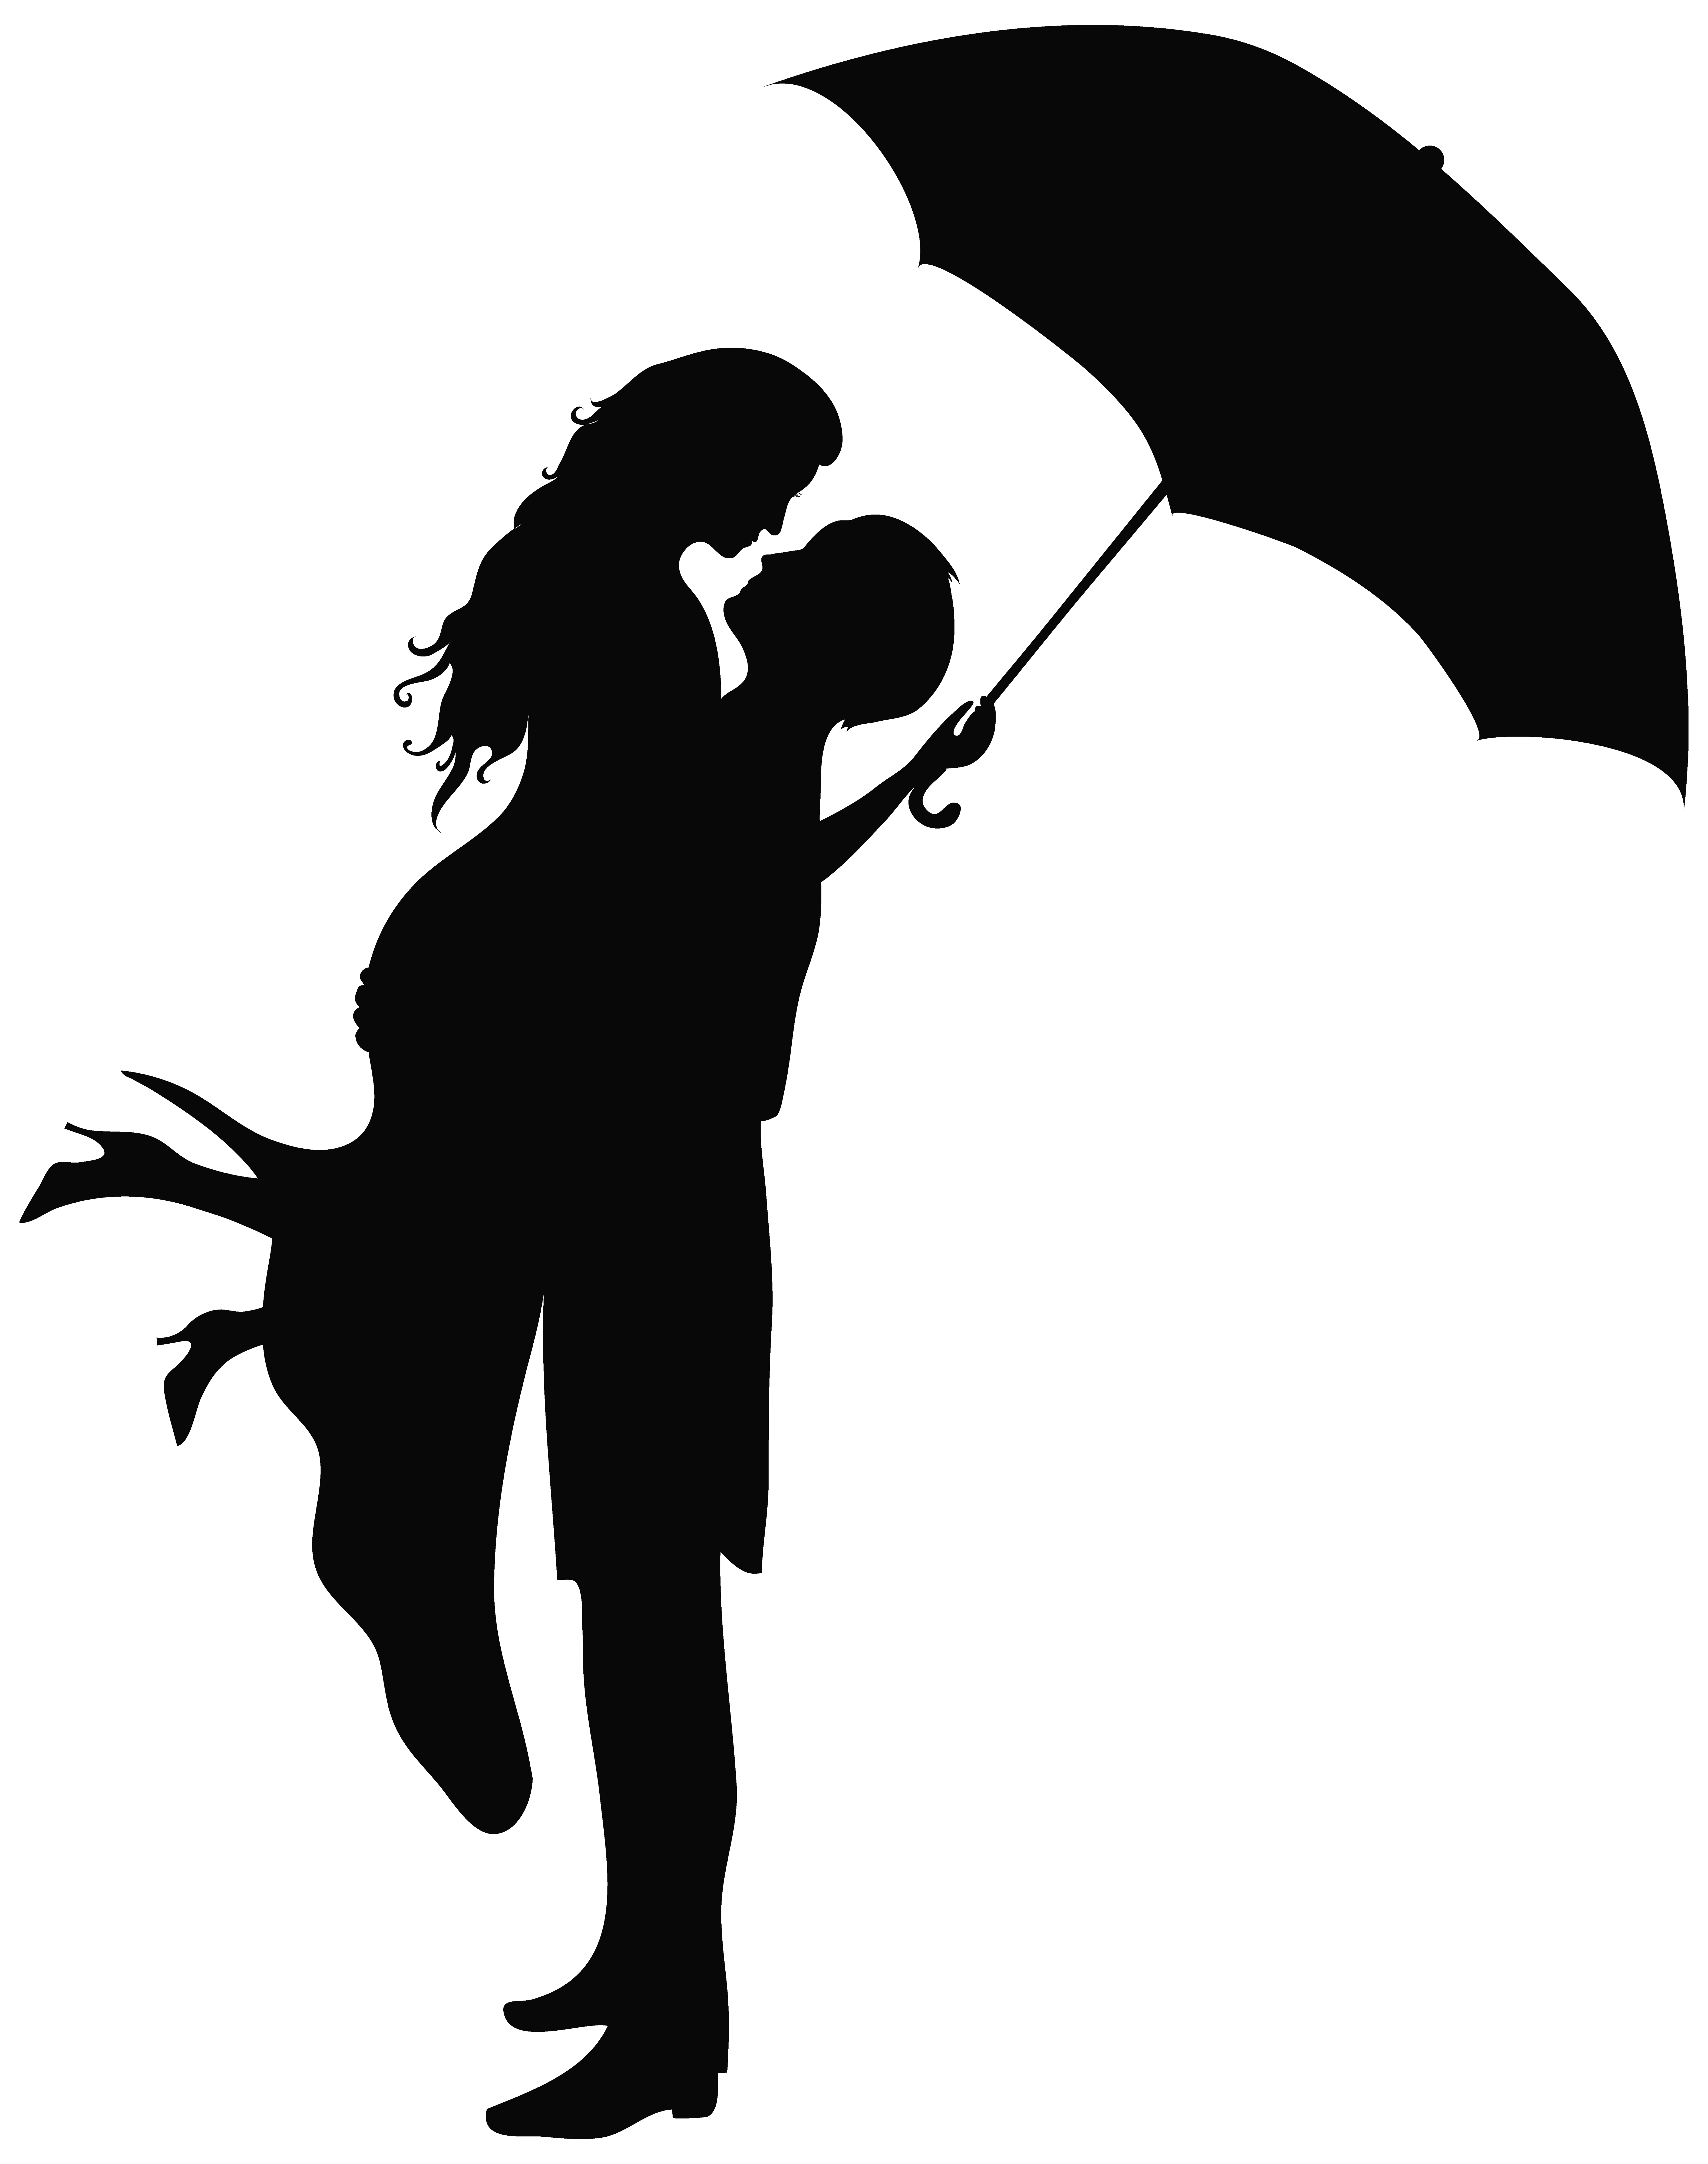 Romantic Couple Silhouettes Png Clip Art Image Gallery Clip Art Library